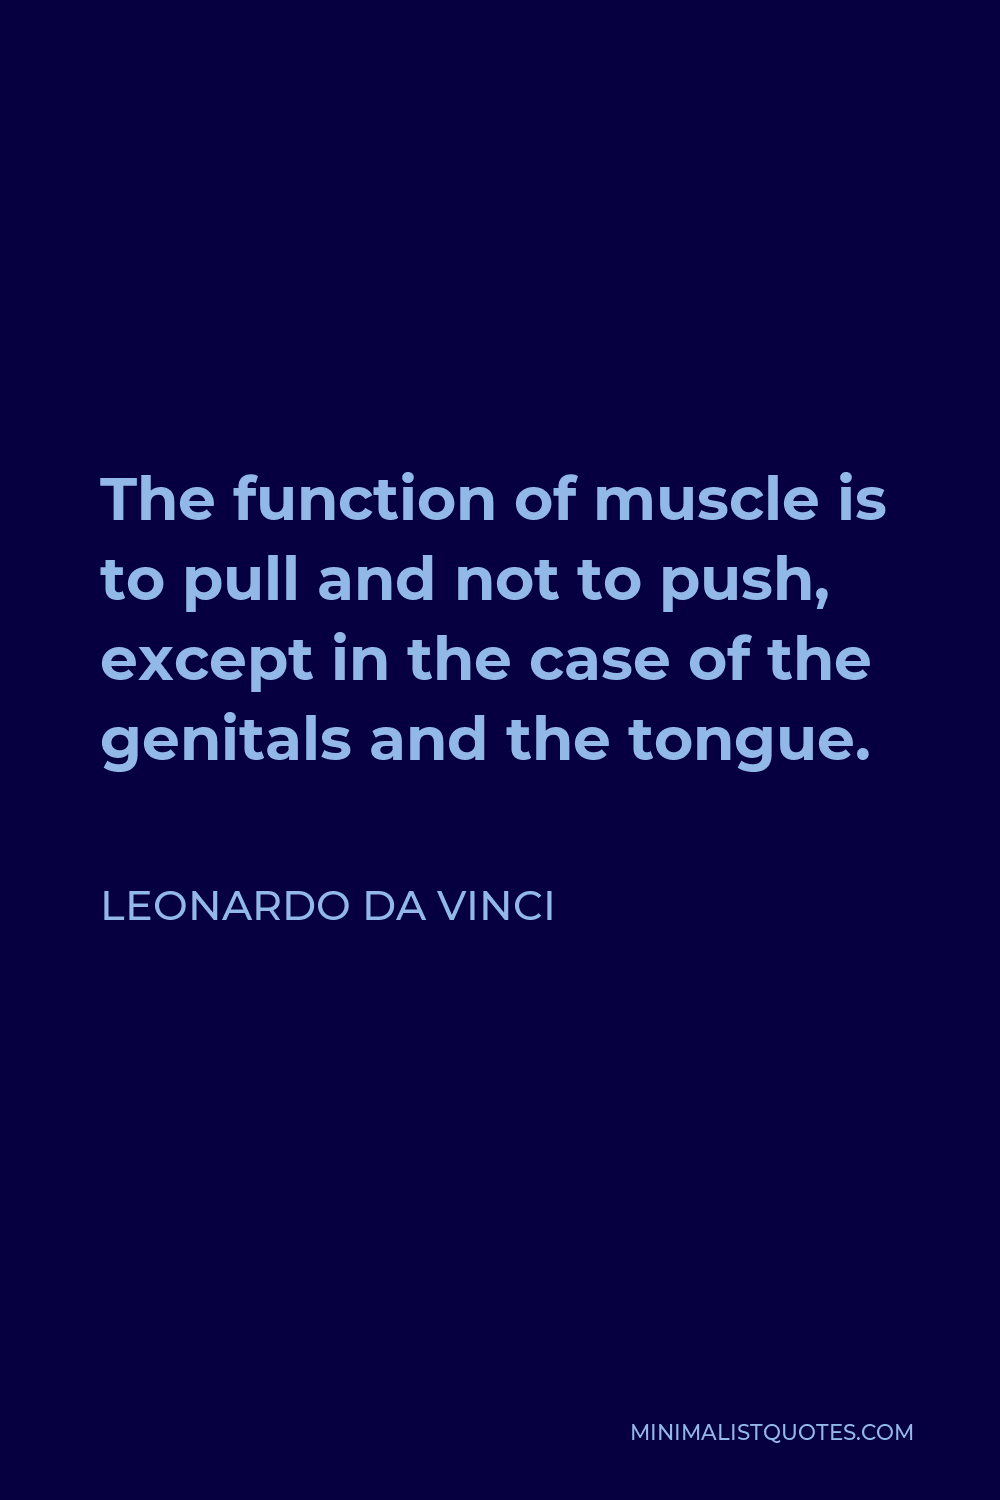 Leonardo da Vinci Quote - The function of muscle is to pull and not to push, except in the case of the genitals and the tongue.